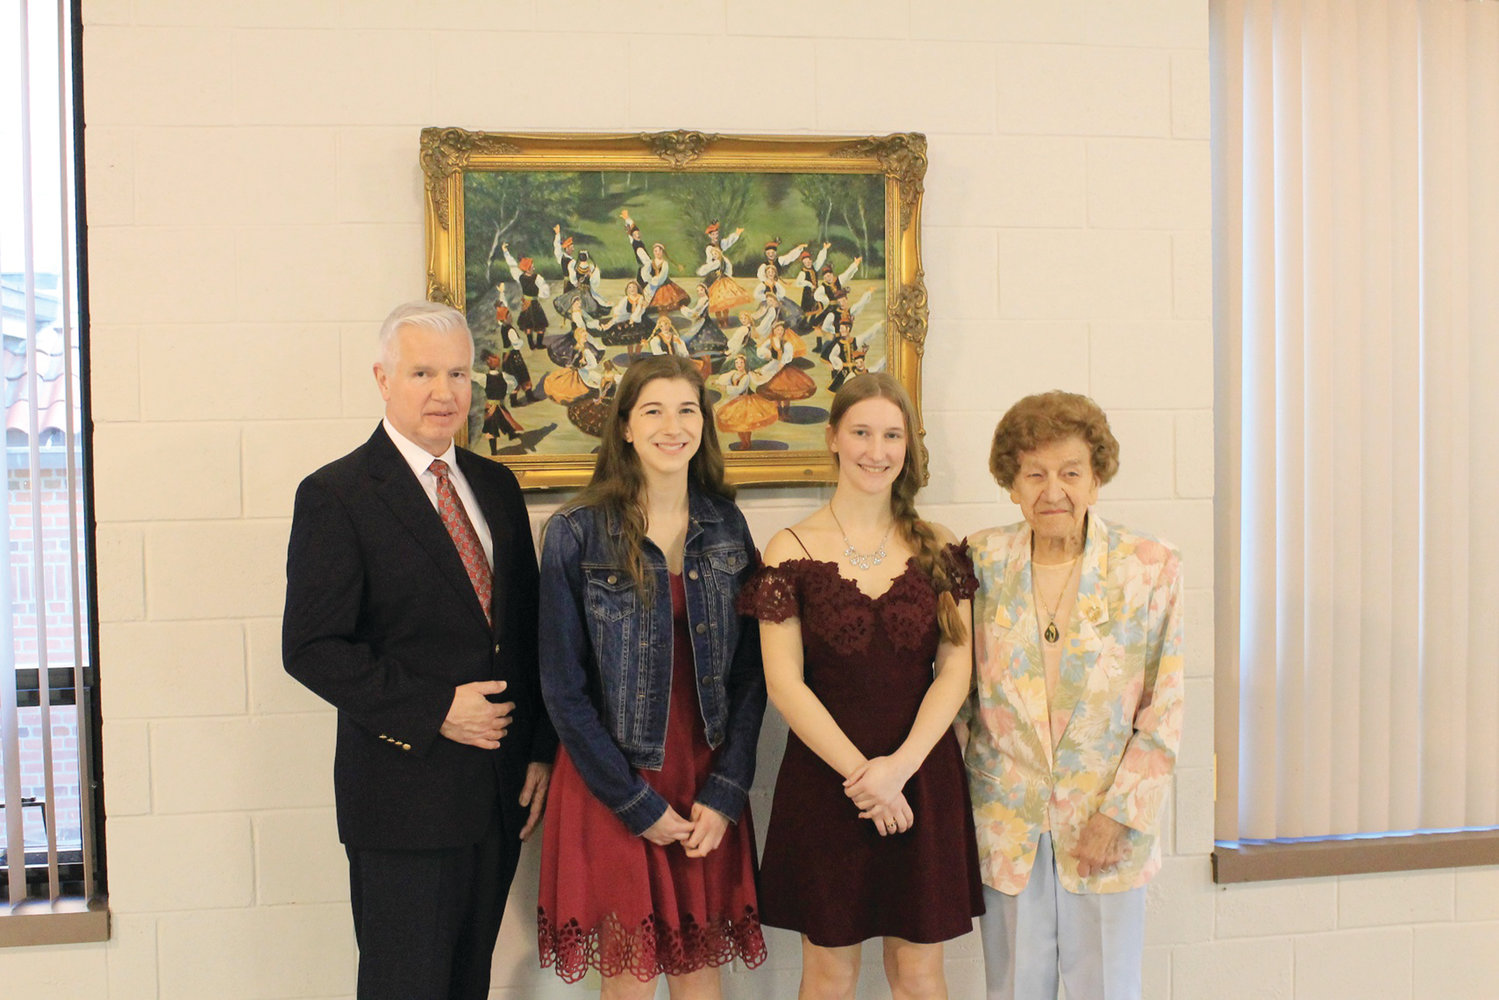 Pictured left to right are Foundation President Gregory Malec, scholarship recipients Vanessa A. Szulc and Klaudia Gajda, and Dr. Dorothy Pieniadz.